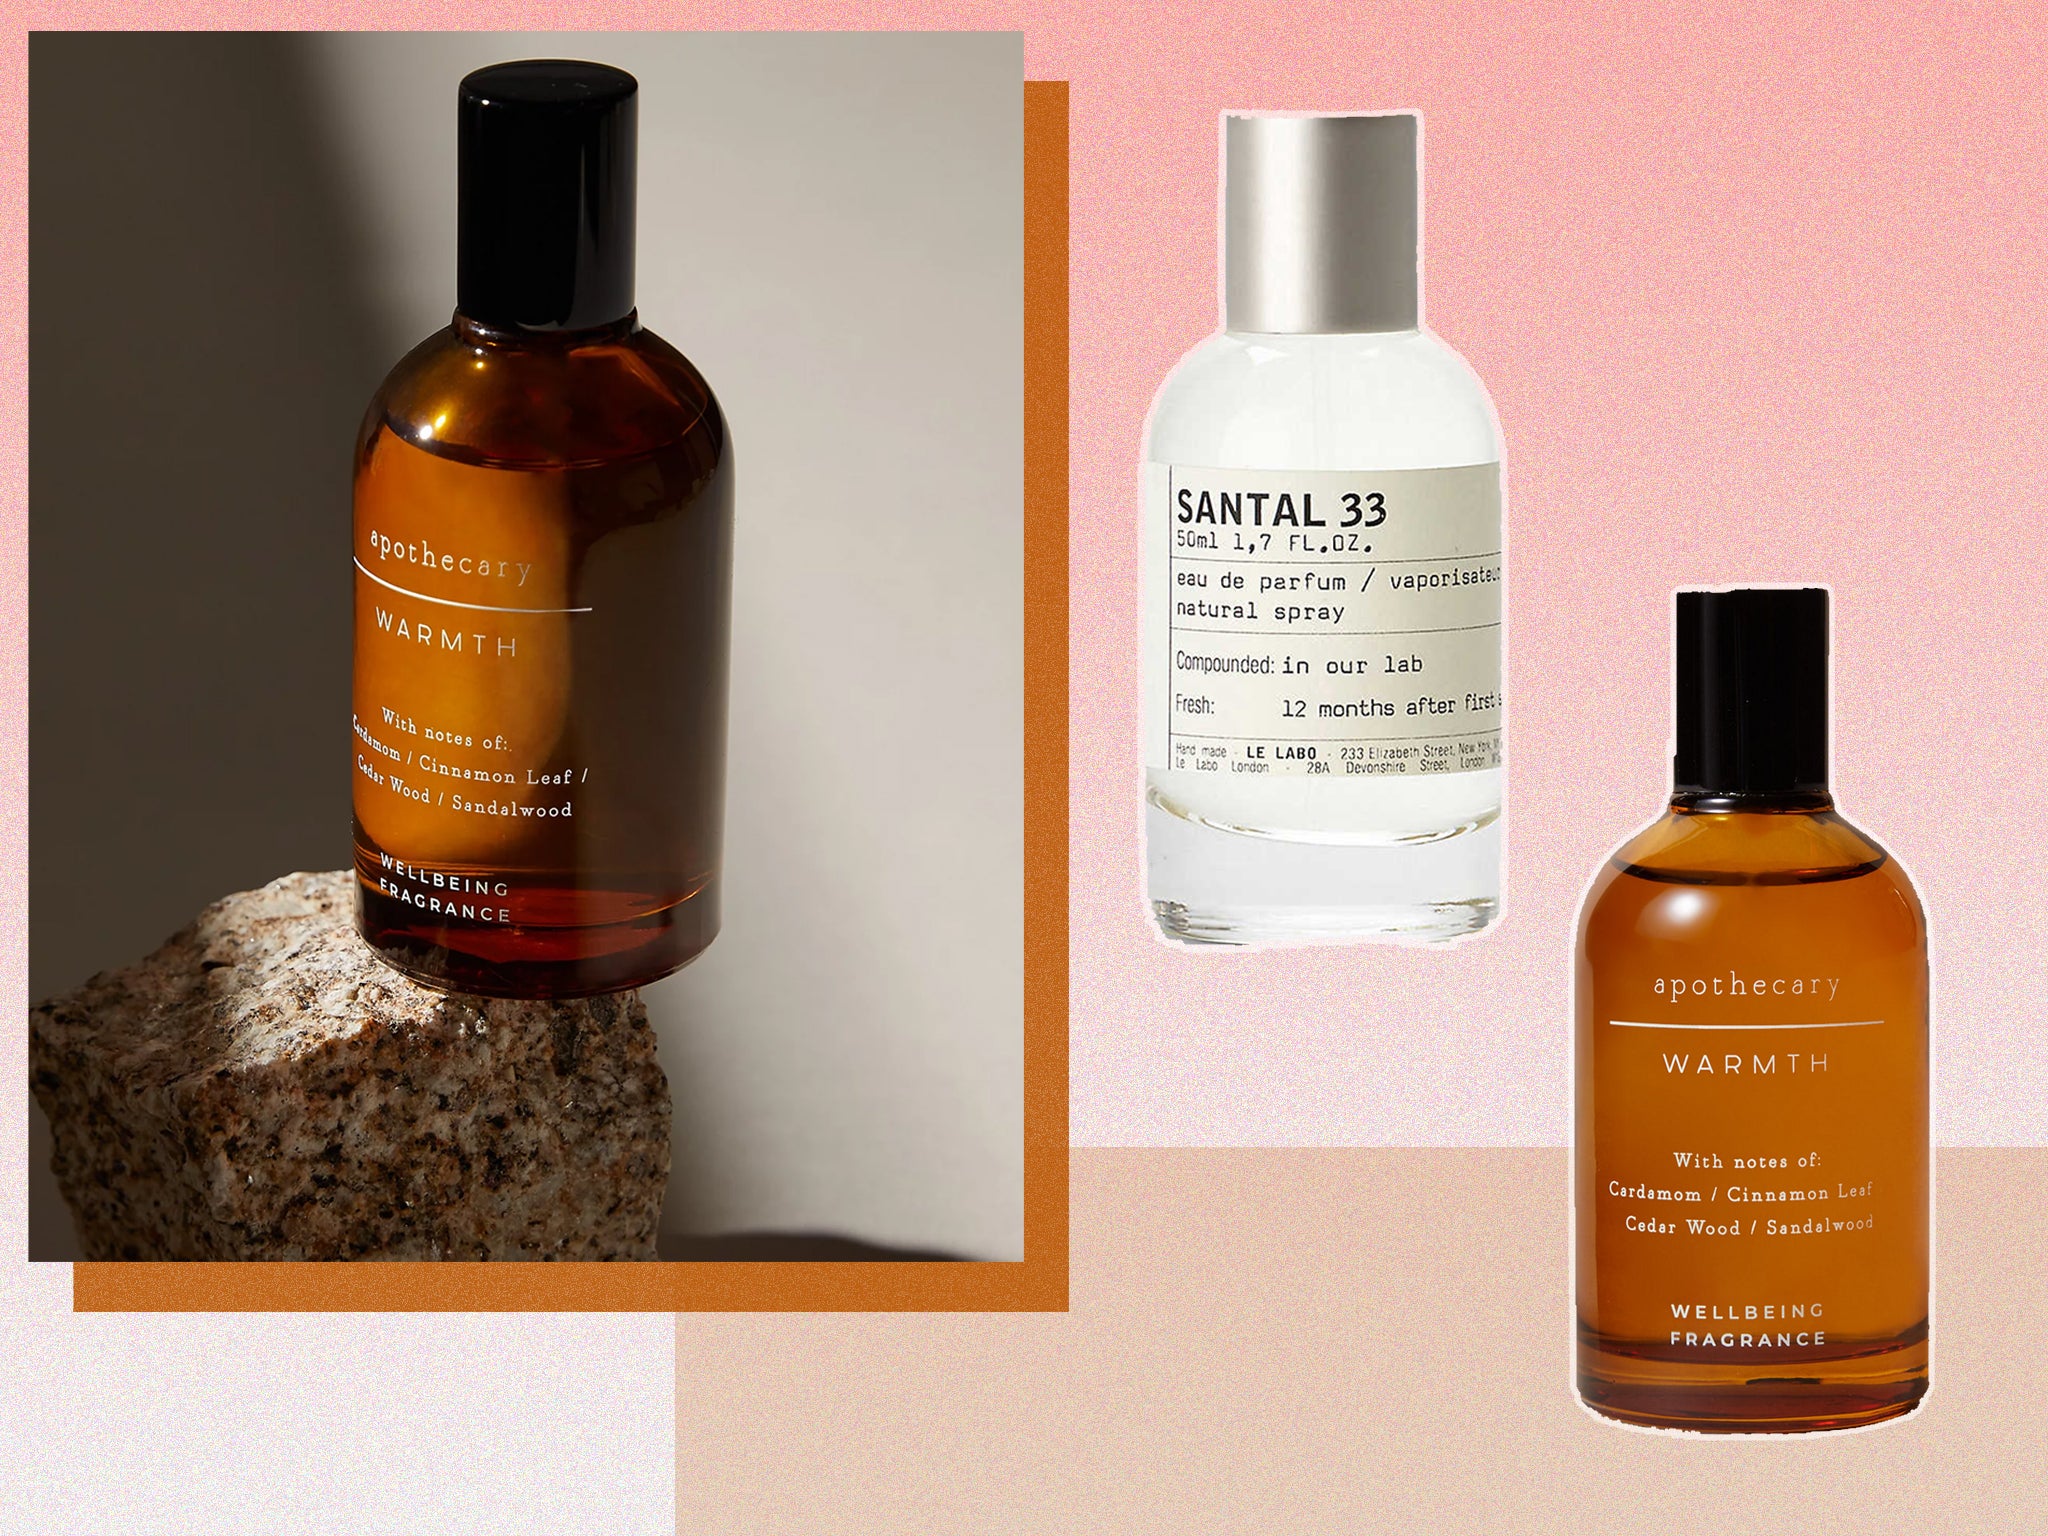 M&S’s warmth perfume is a dupe of Le Labo’s santal 33 perfume | The